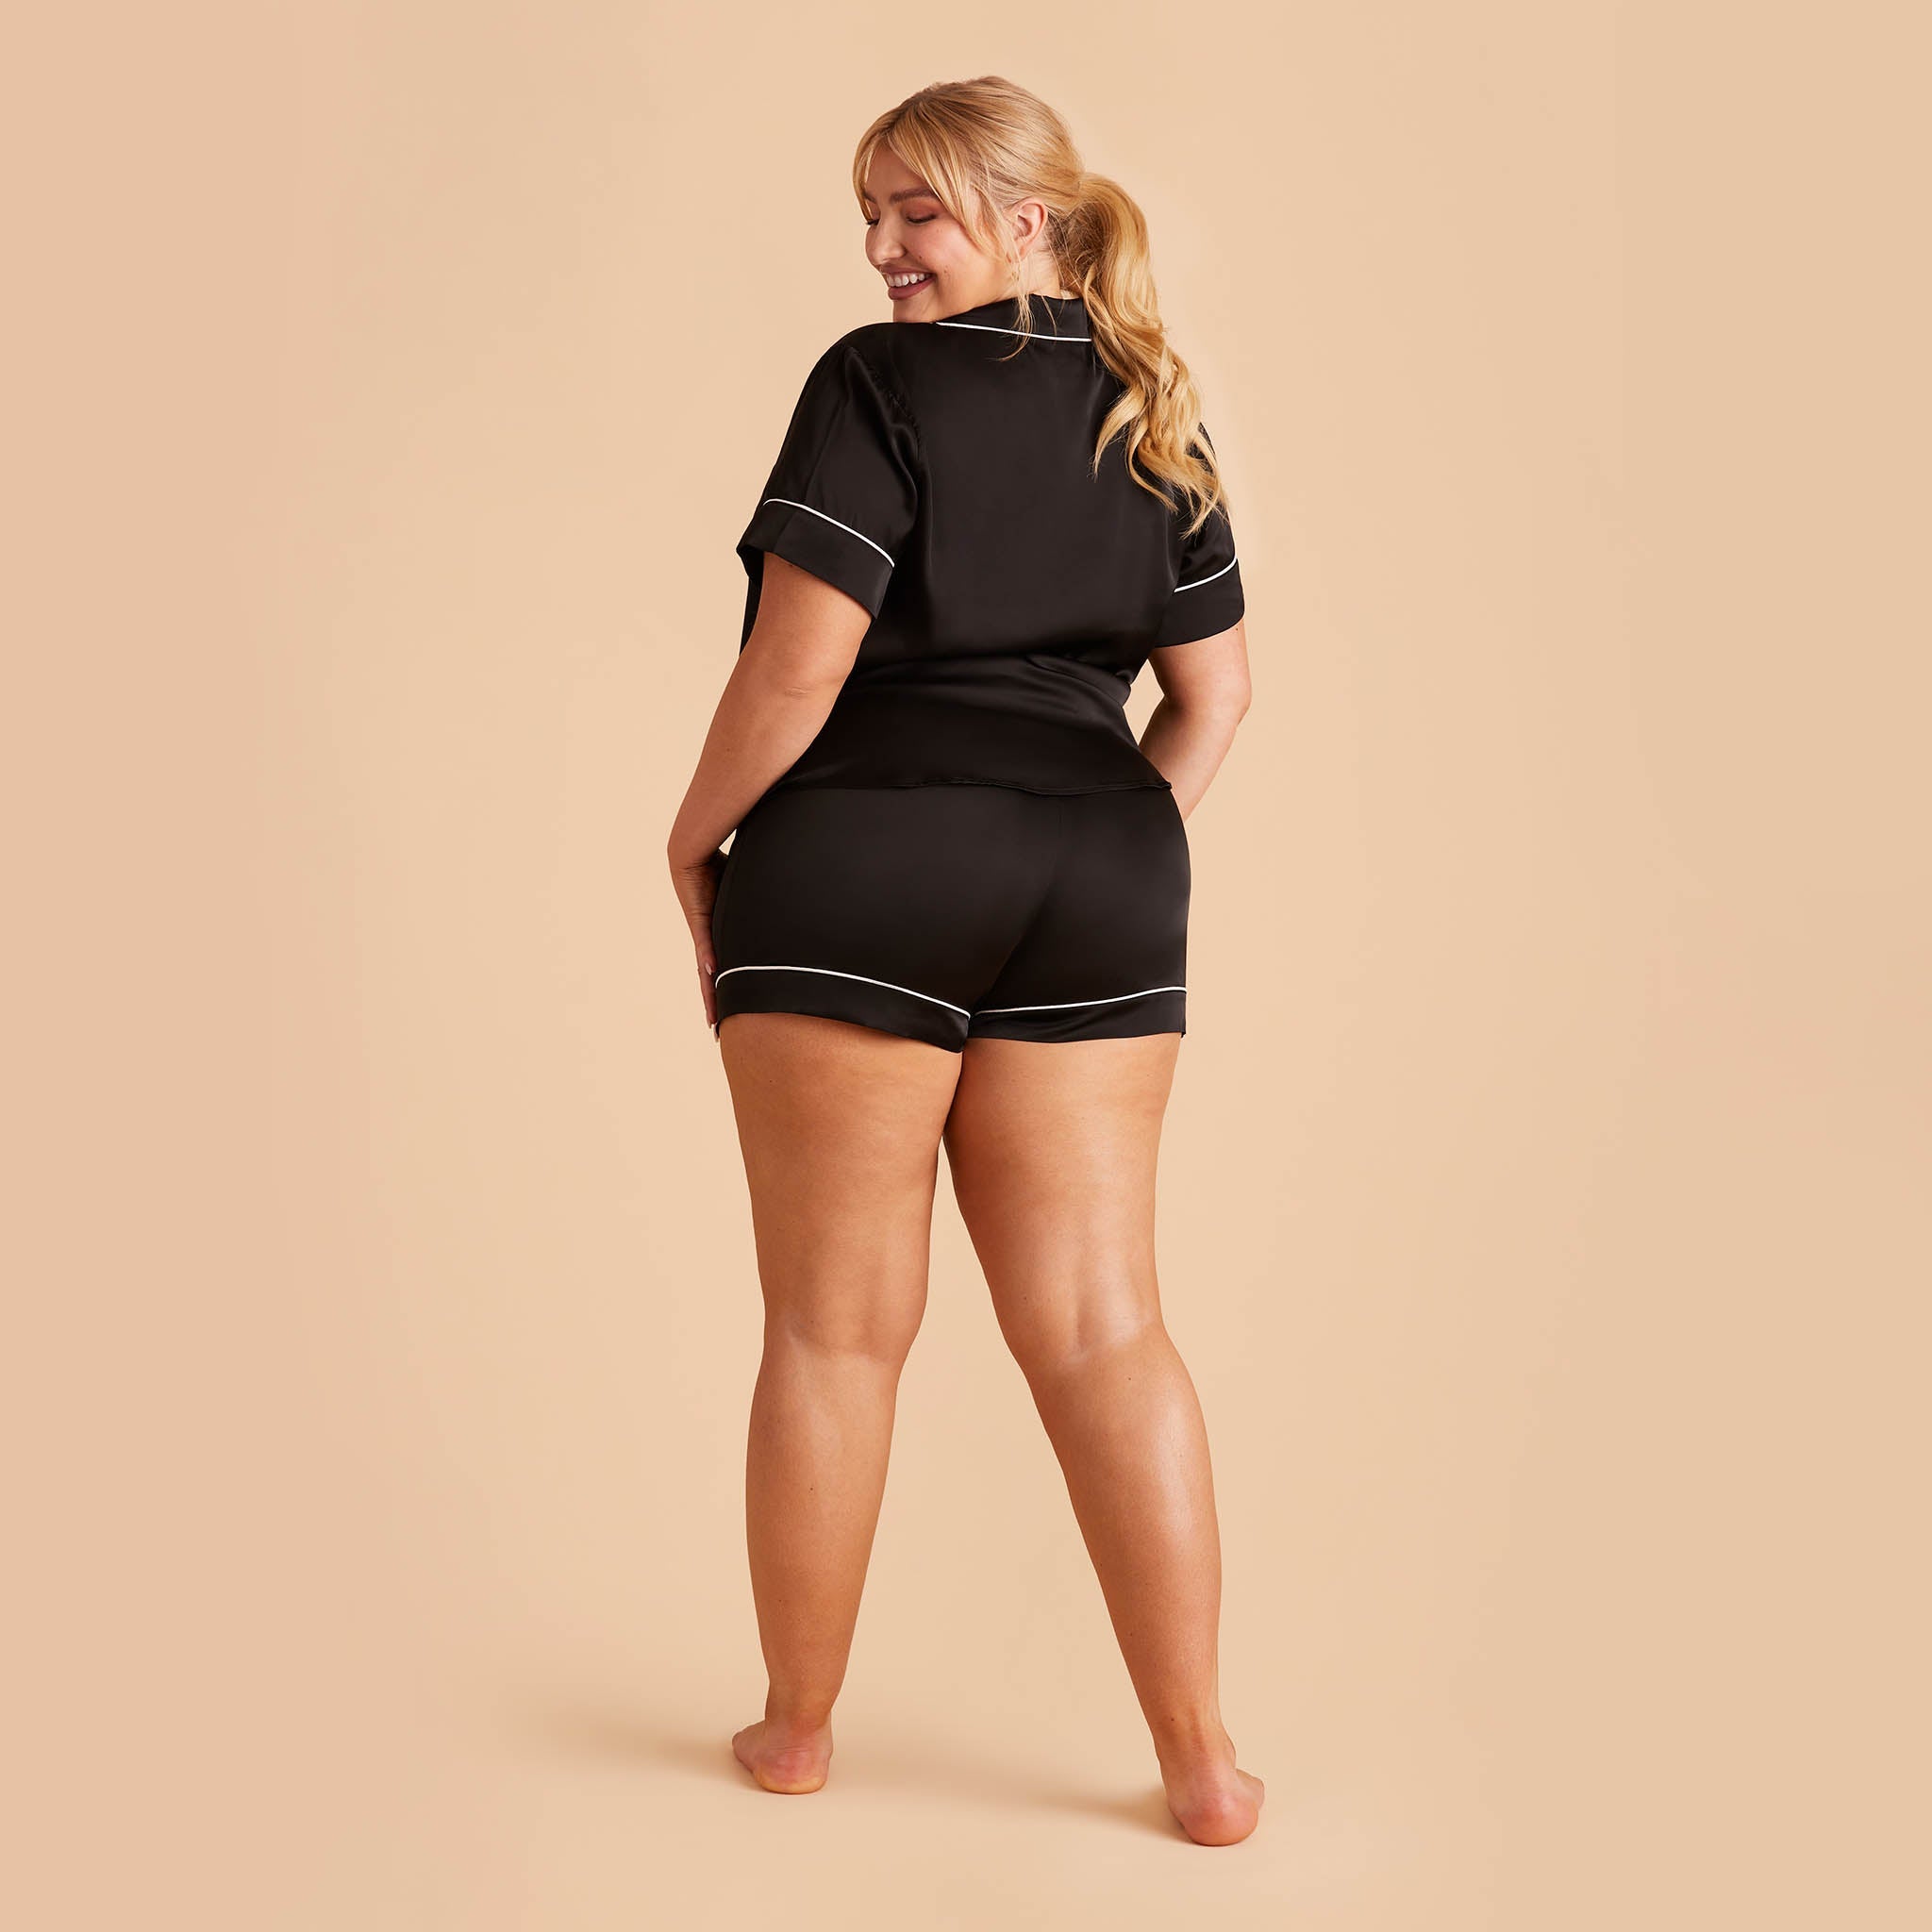 Jonny Plus Size Satin Shorts Bridesmaid Pajamas With White Piping in Black, back view